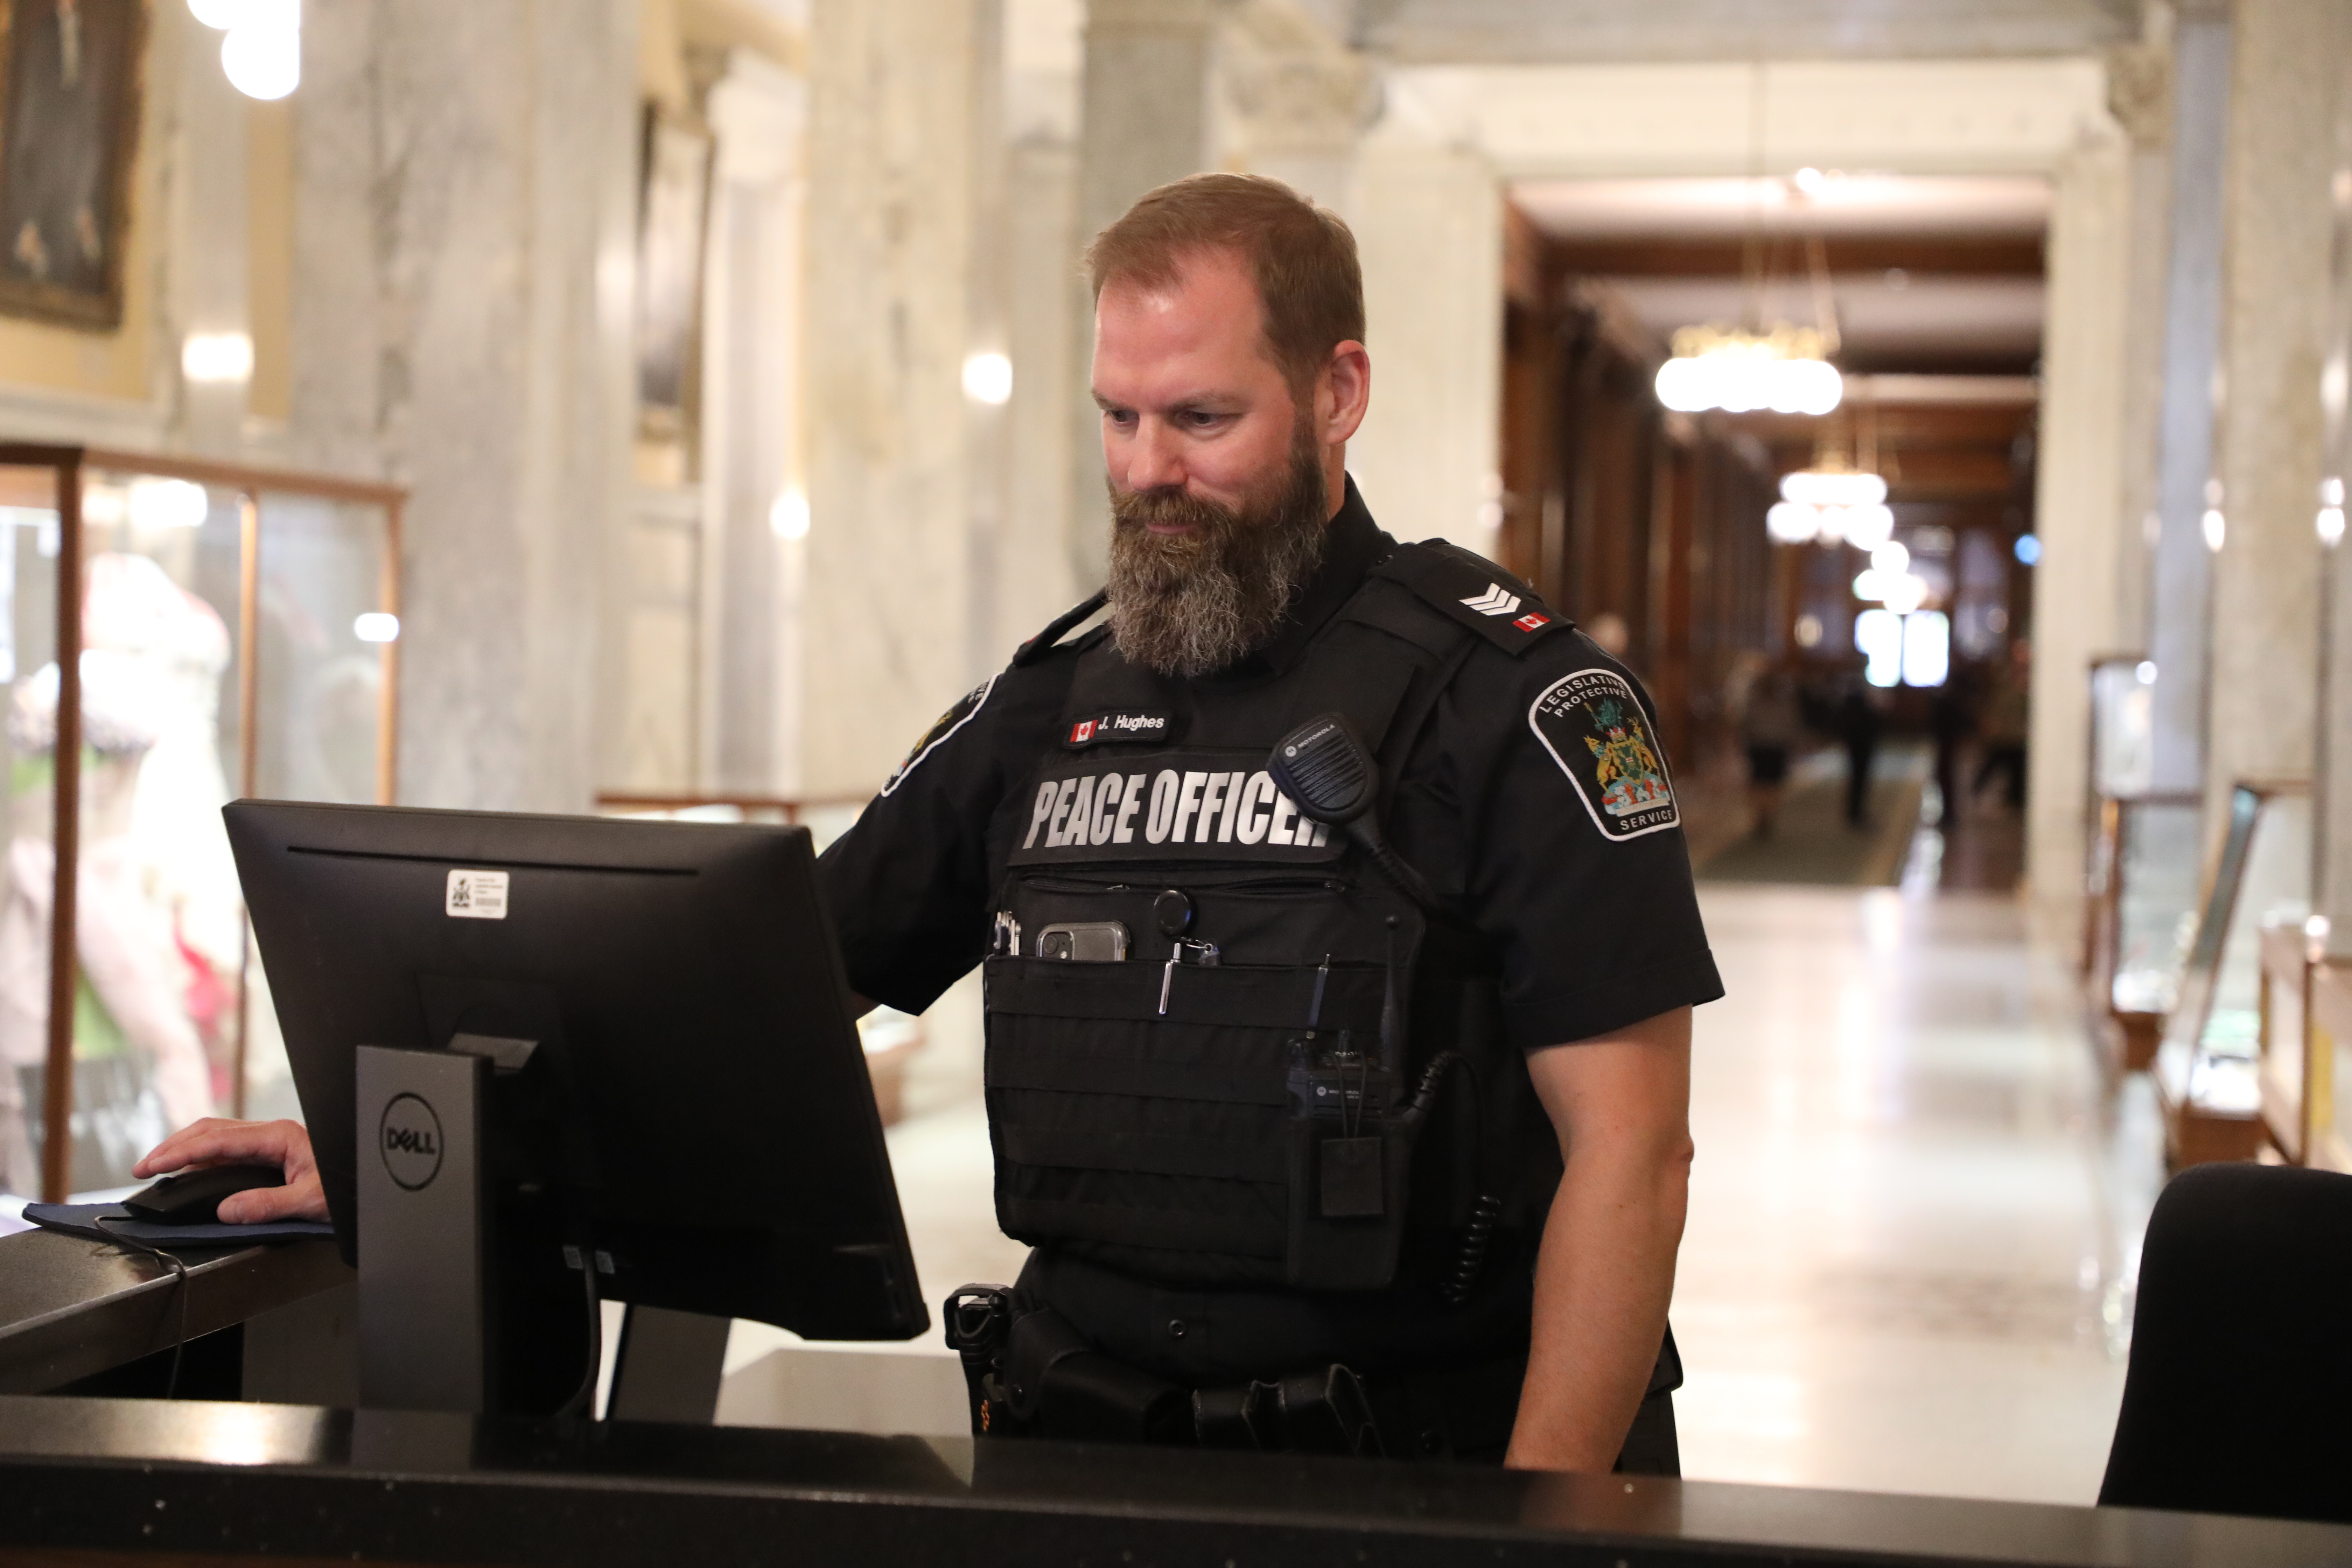 Peace Officer at a security desk